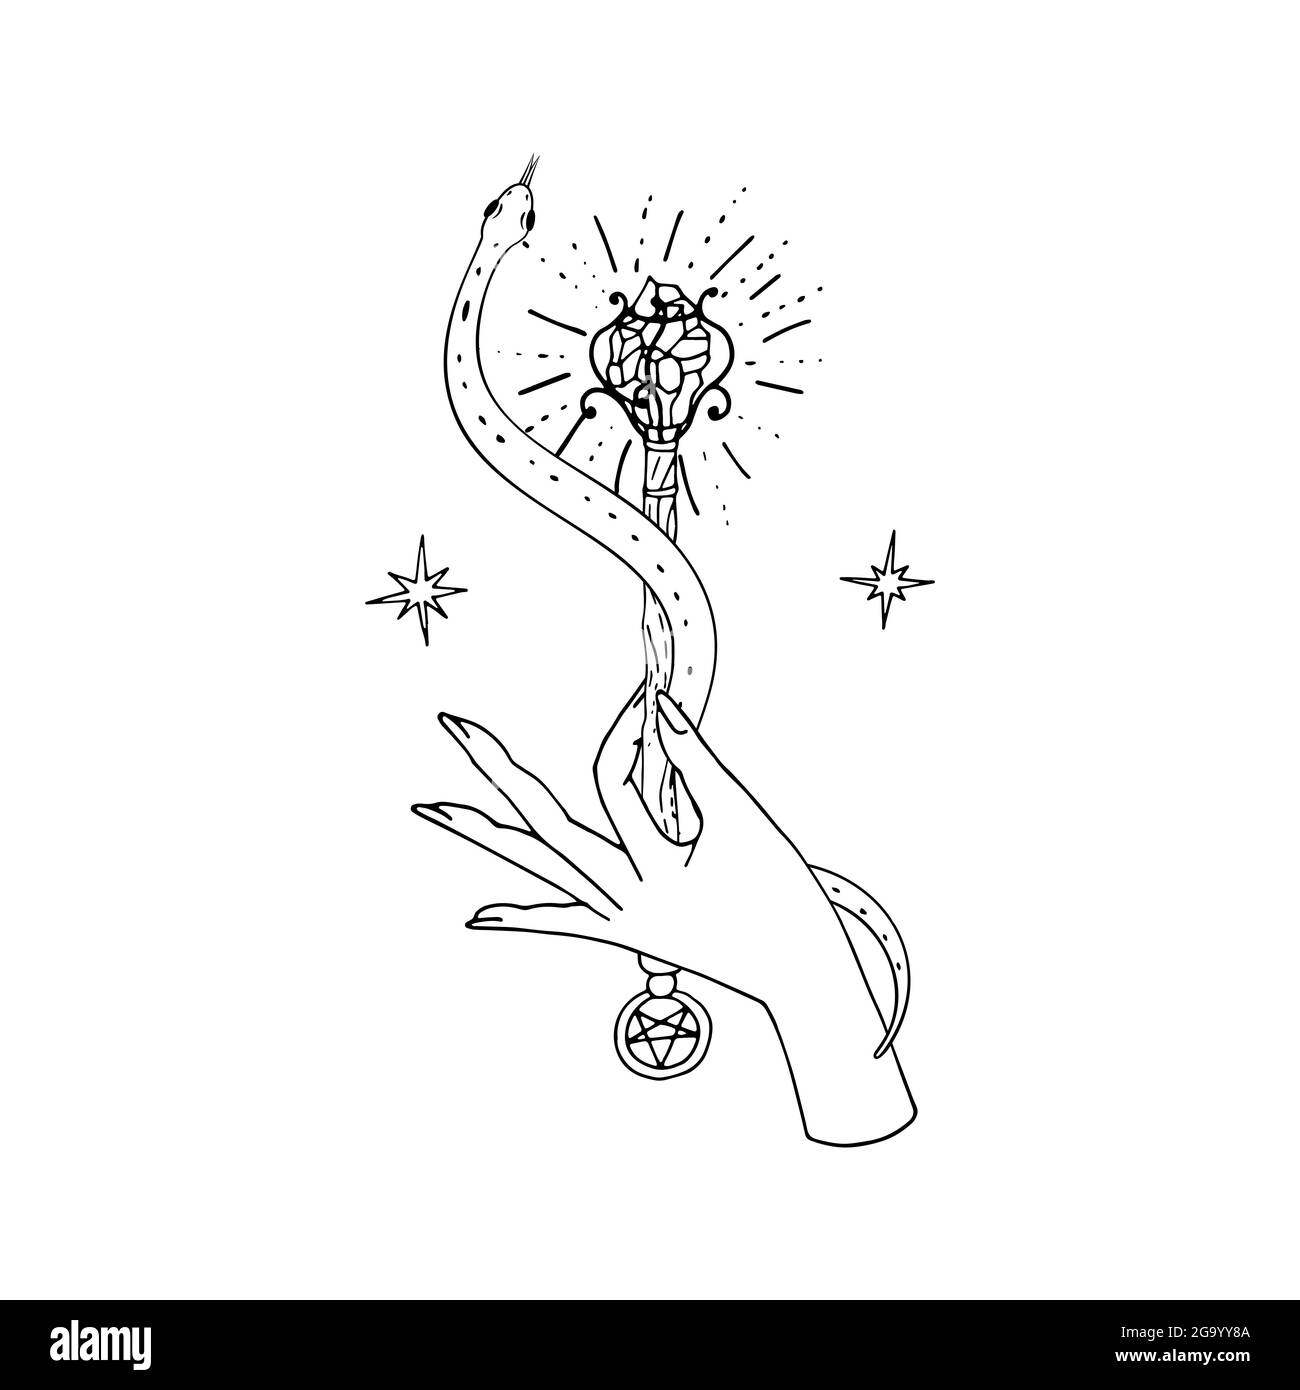 Vintage Mystic snake coiled around the magic wand hold in hand Stock Vector